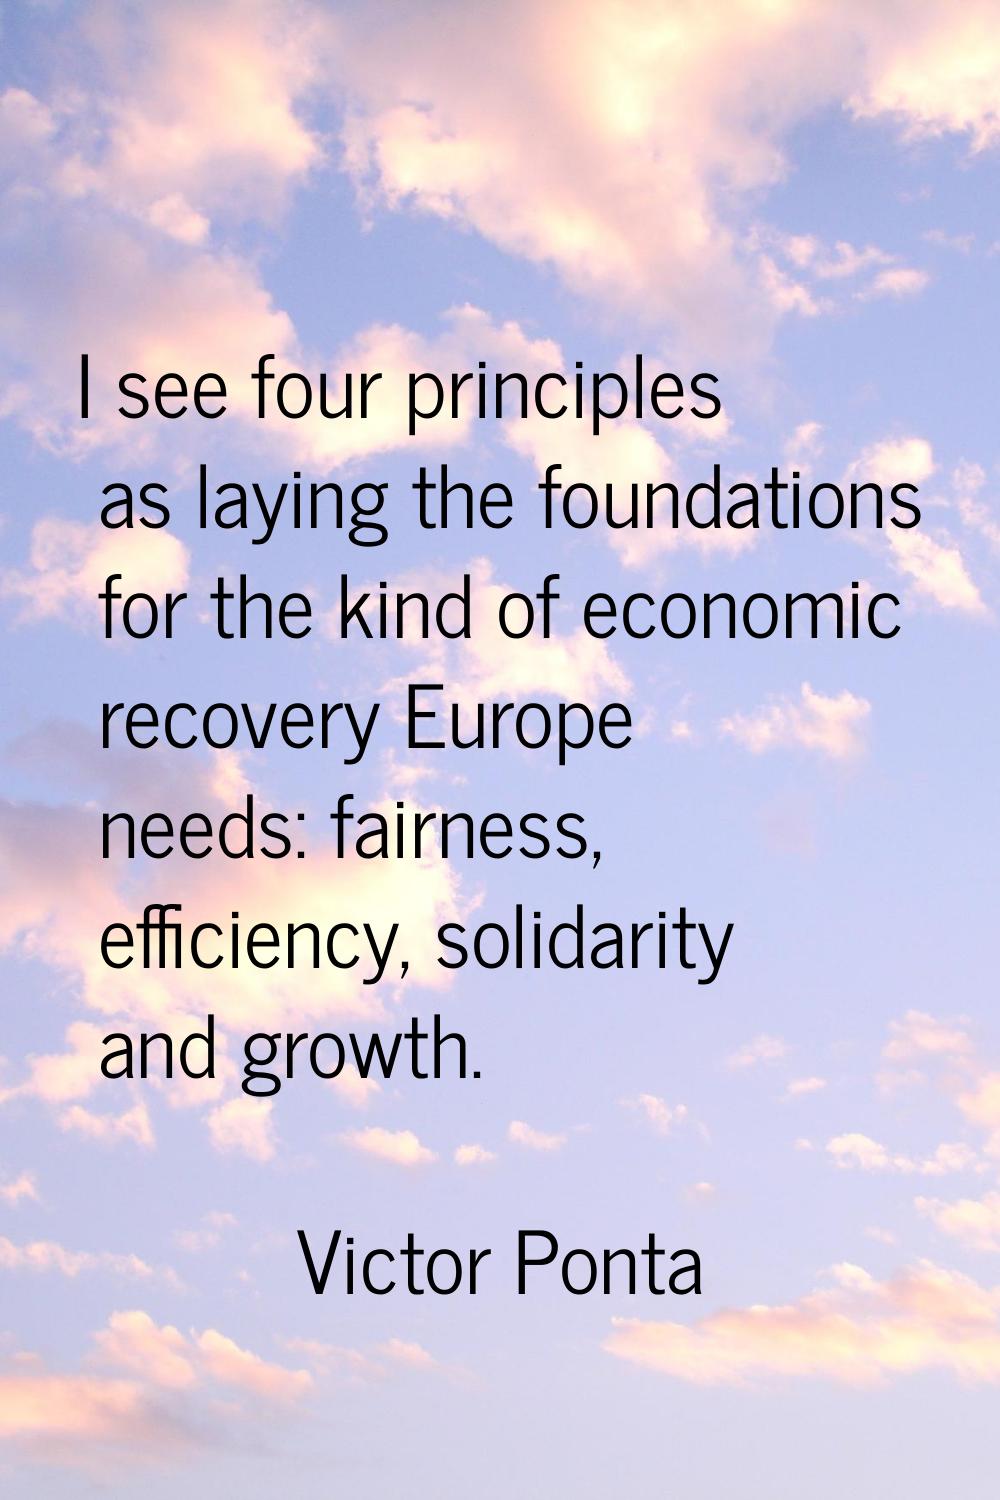 I see four principles as laying the foundations for the kind of economic recovery Europe needs: fai